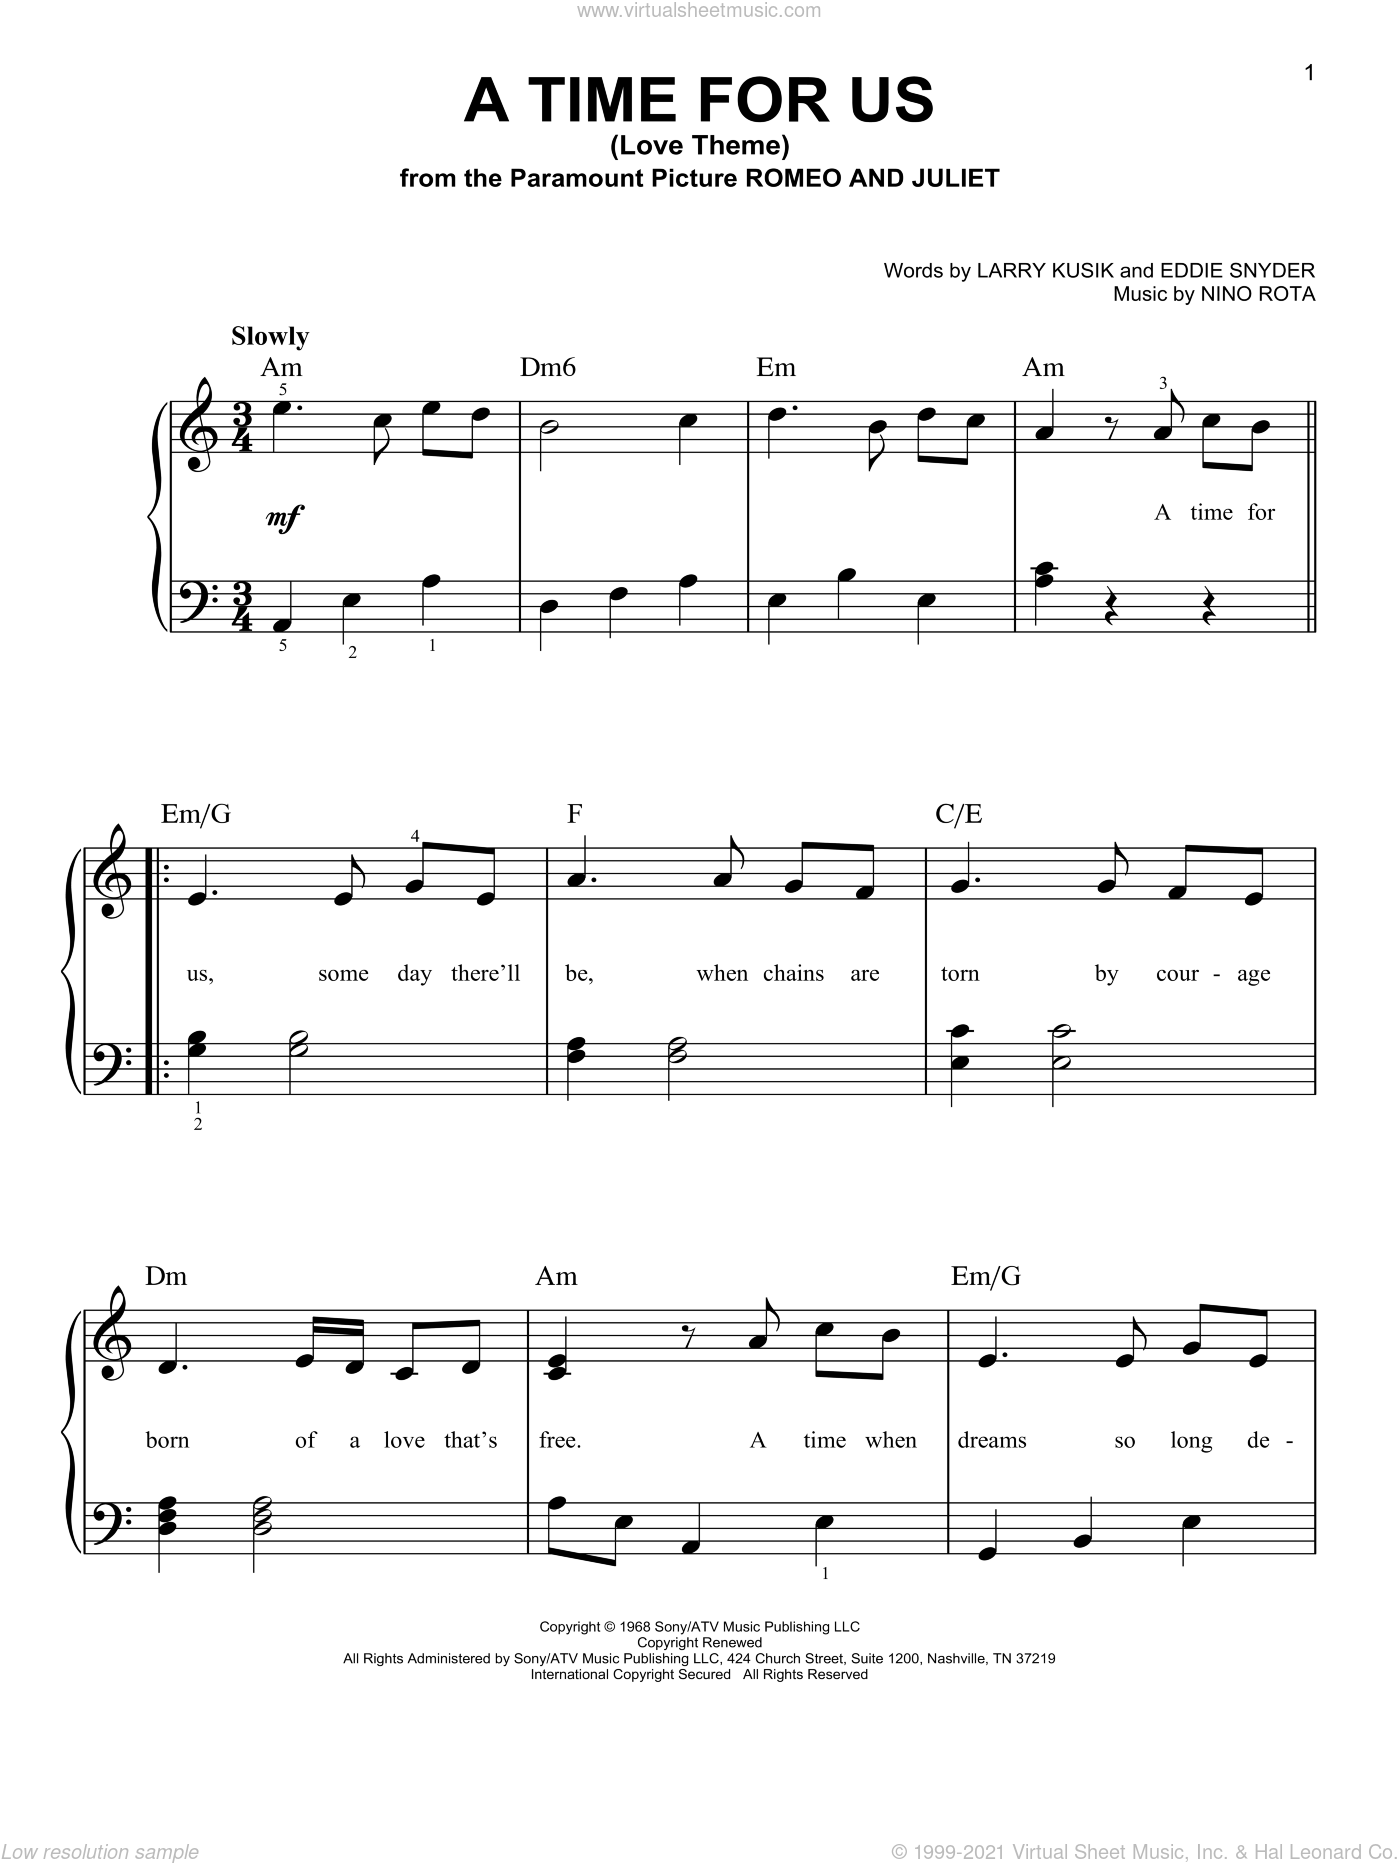 You're My Friend - Erased OST, PIANO arrangement Sheet music for Piano  (Solo) Easy